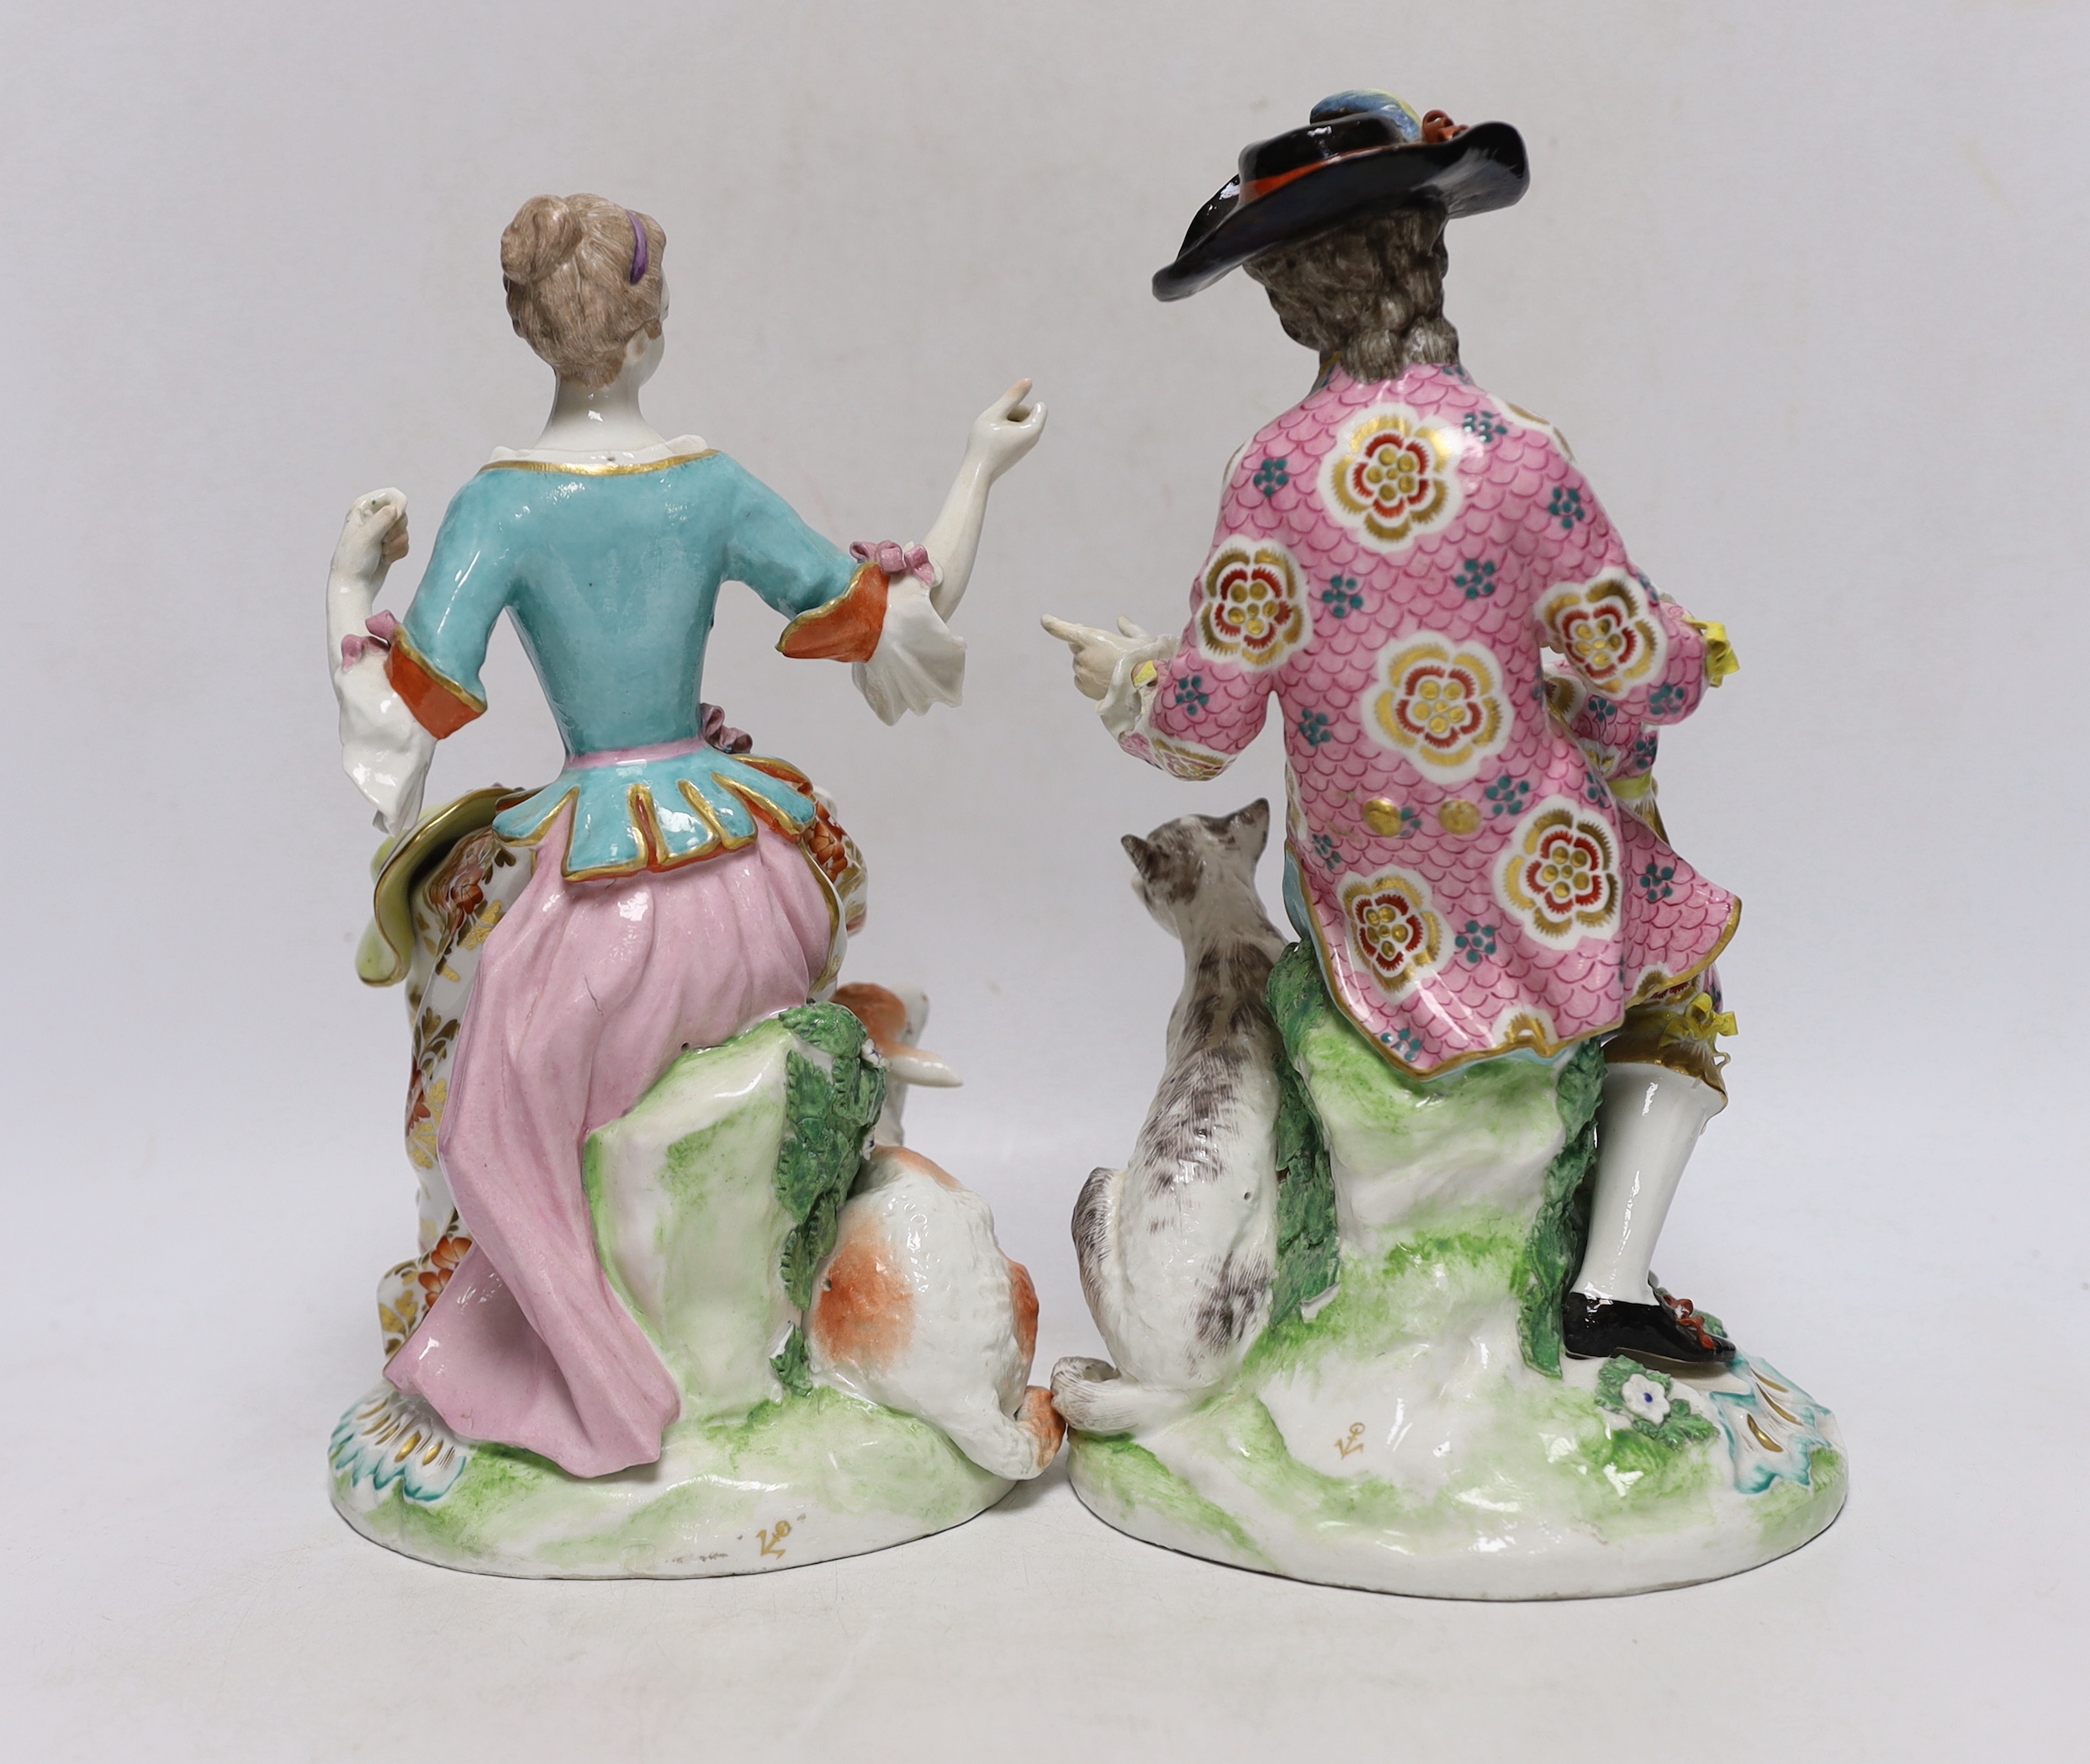 A pair of Samson porcelain figures of a Shepherd and shepherdess wearing 18th century dress, c.1900, largest 27cm high